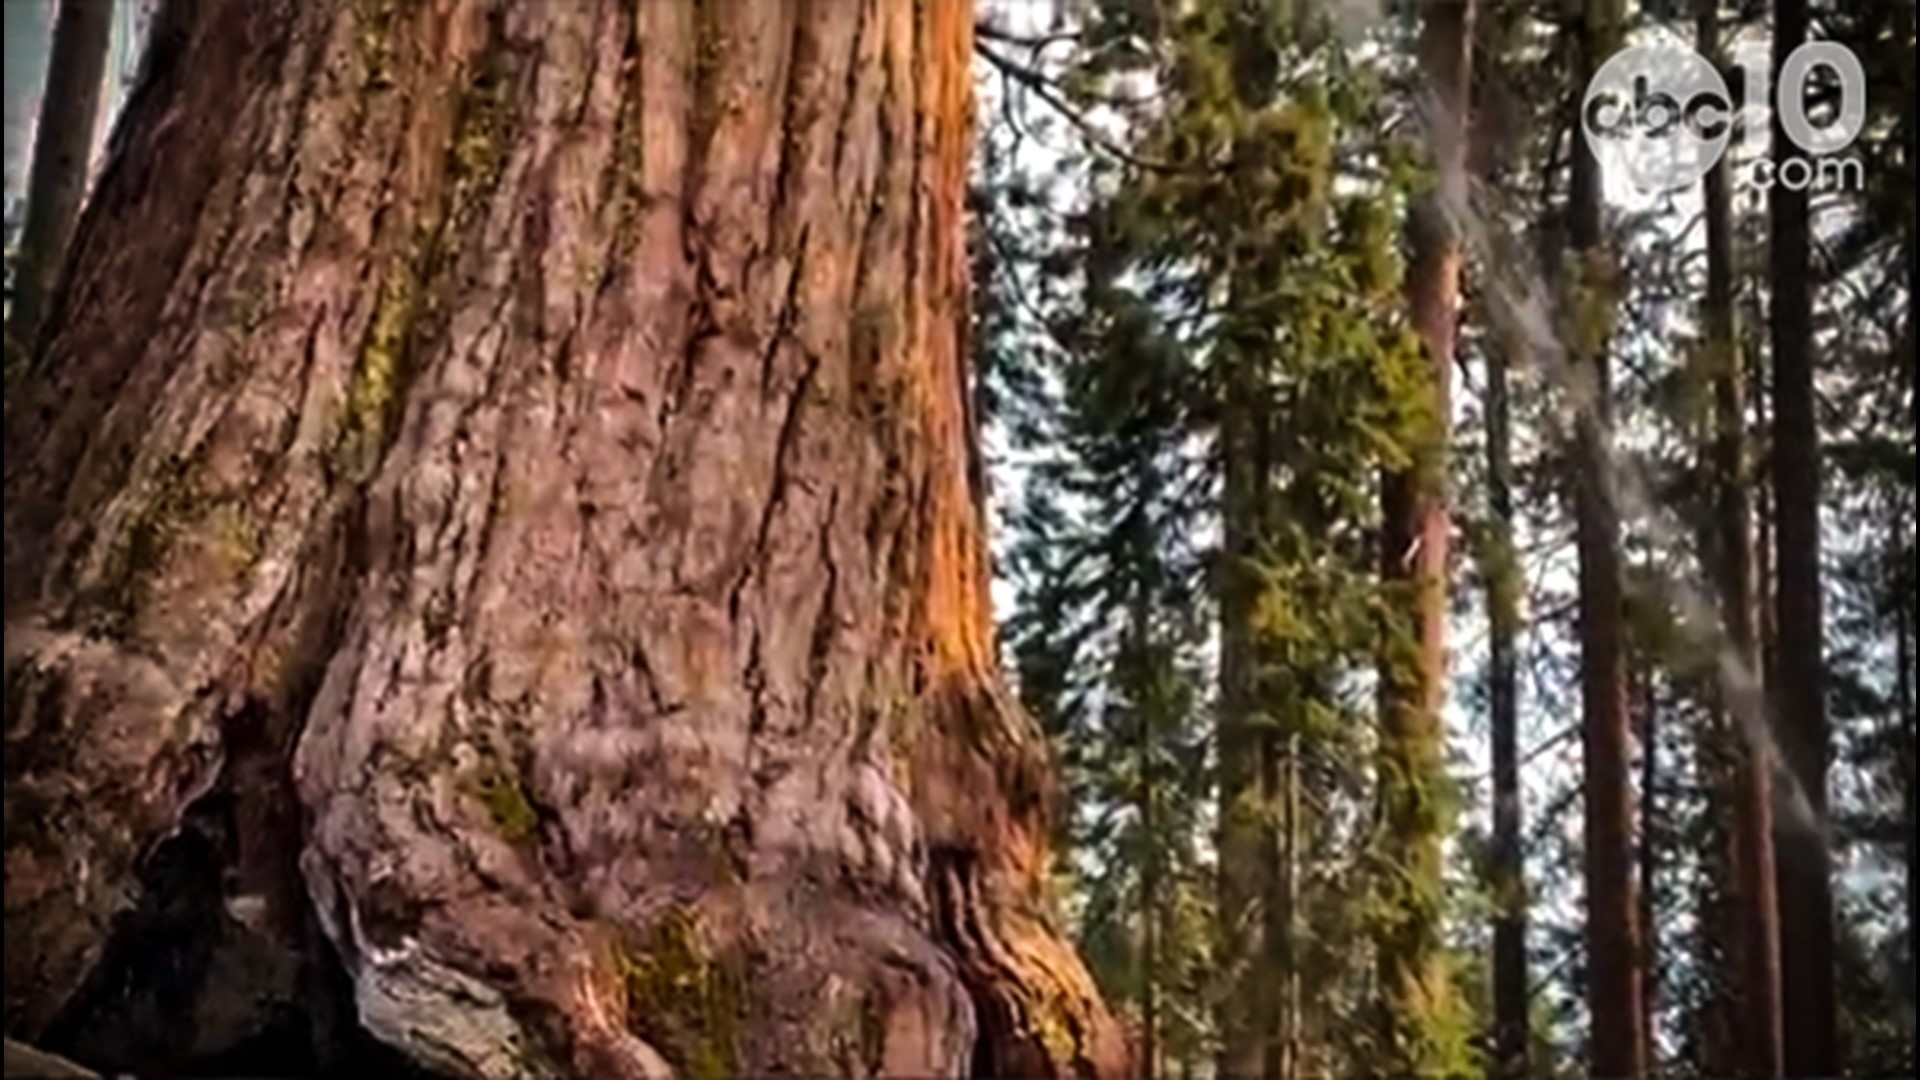 The iconic 20-story tall redwood sequoia tree could be at risk of damage because of the Washburn Fire in Yosemite National Park, and one expert explains why.